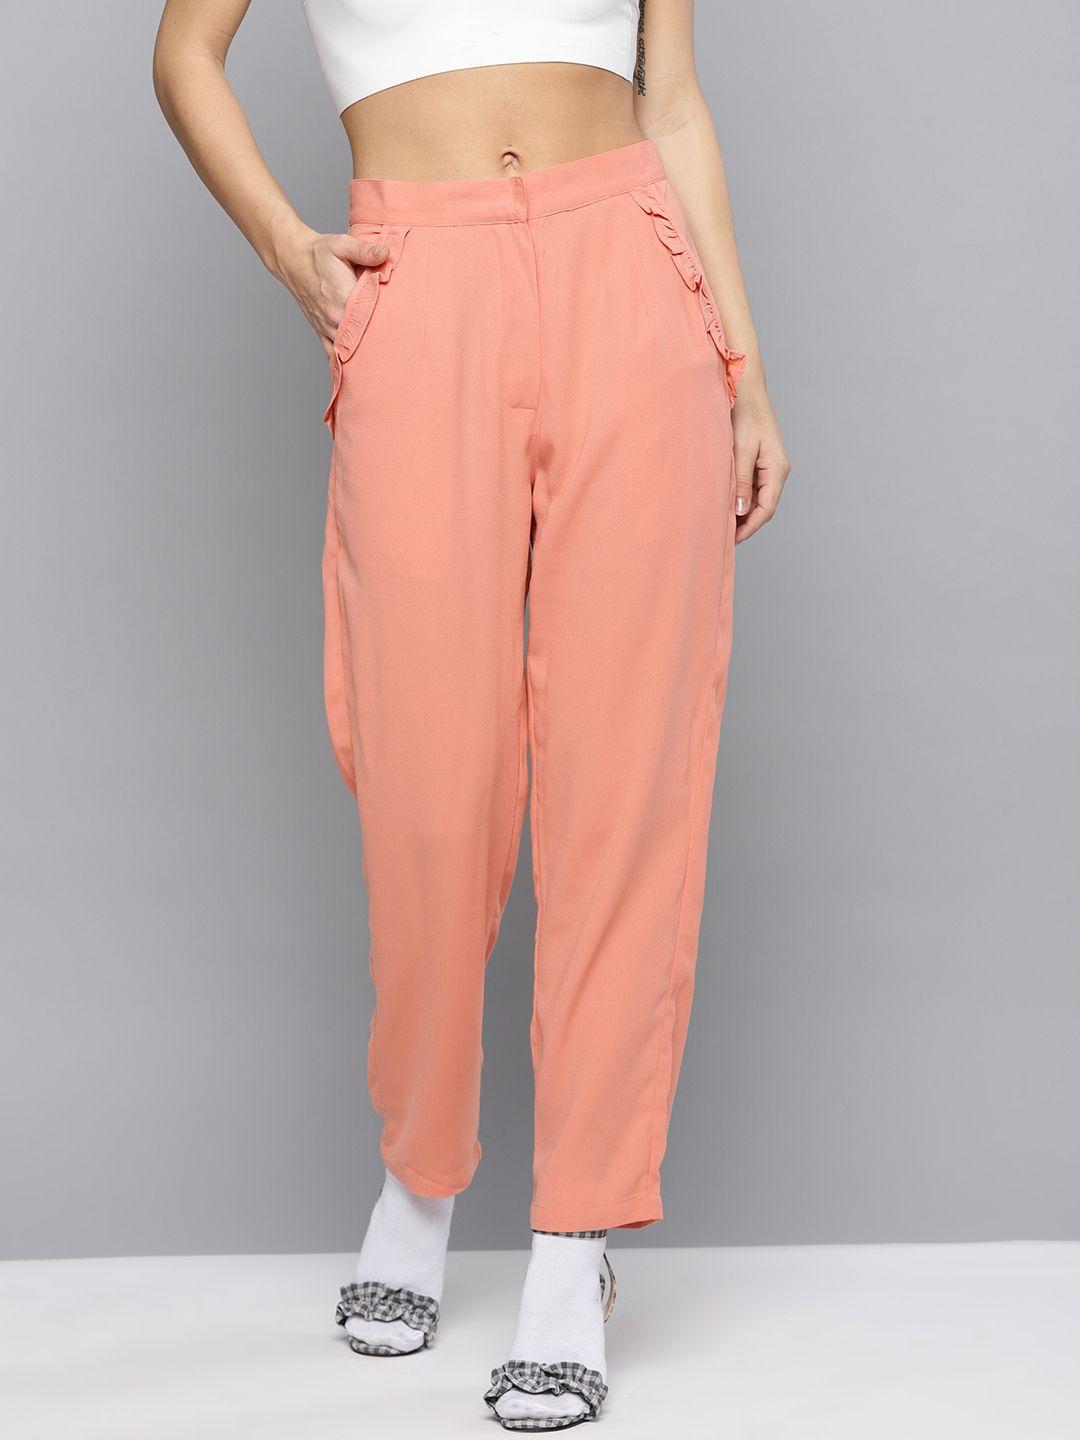 marie claire women peach-coloured regular fit solid regular trousers